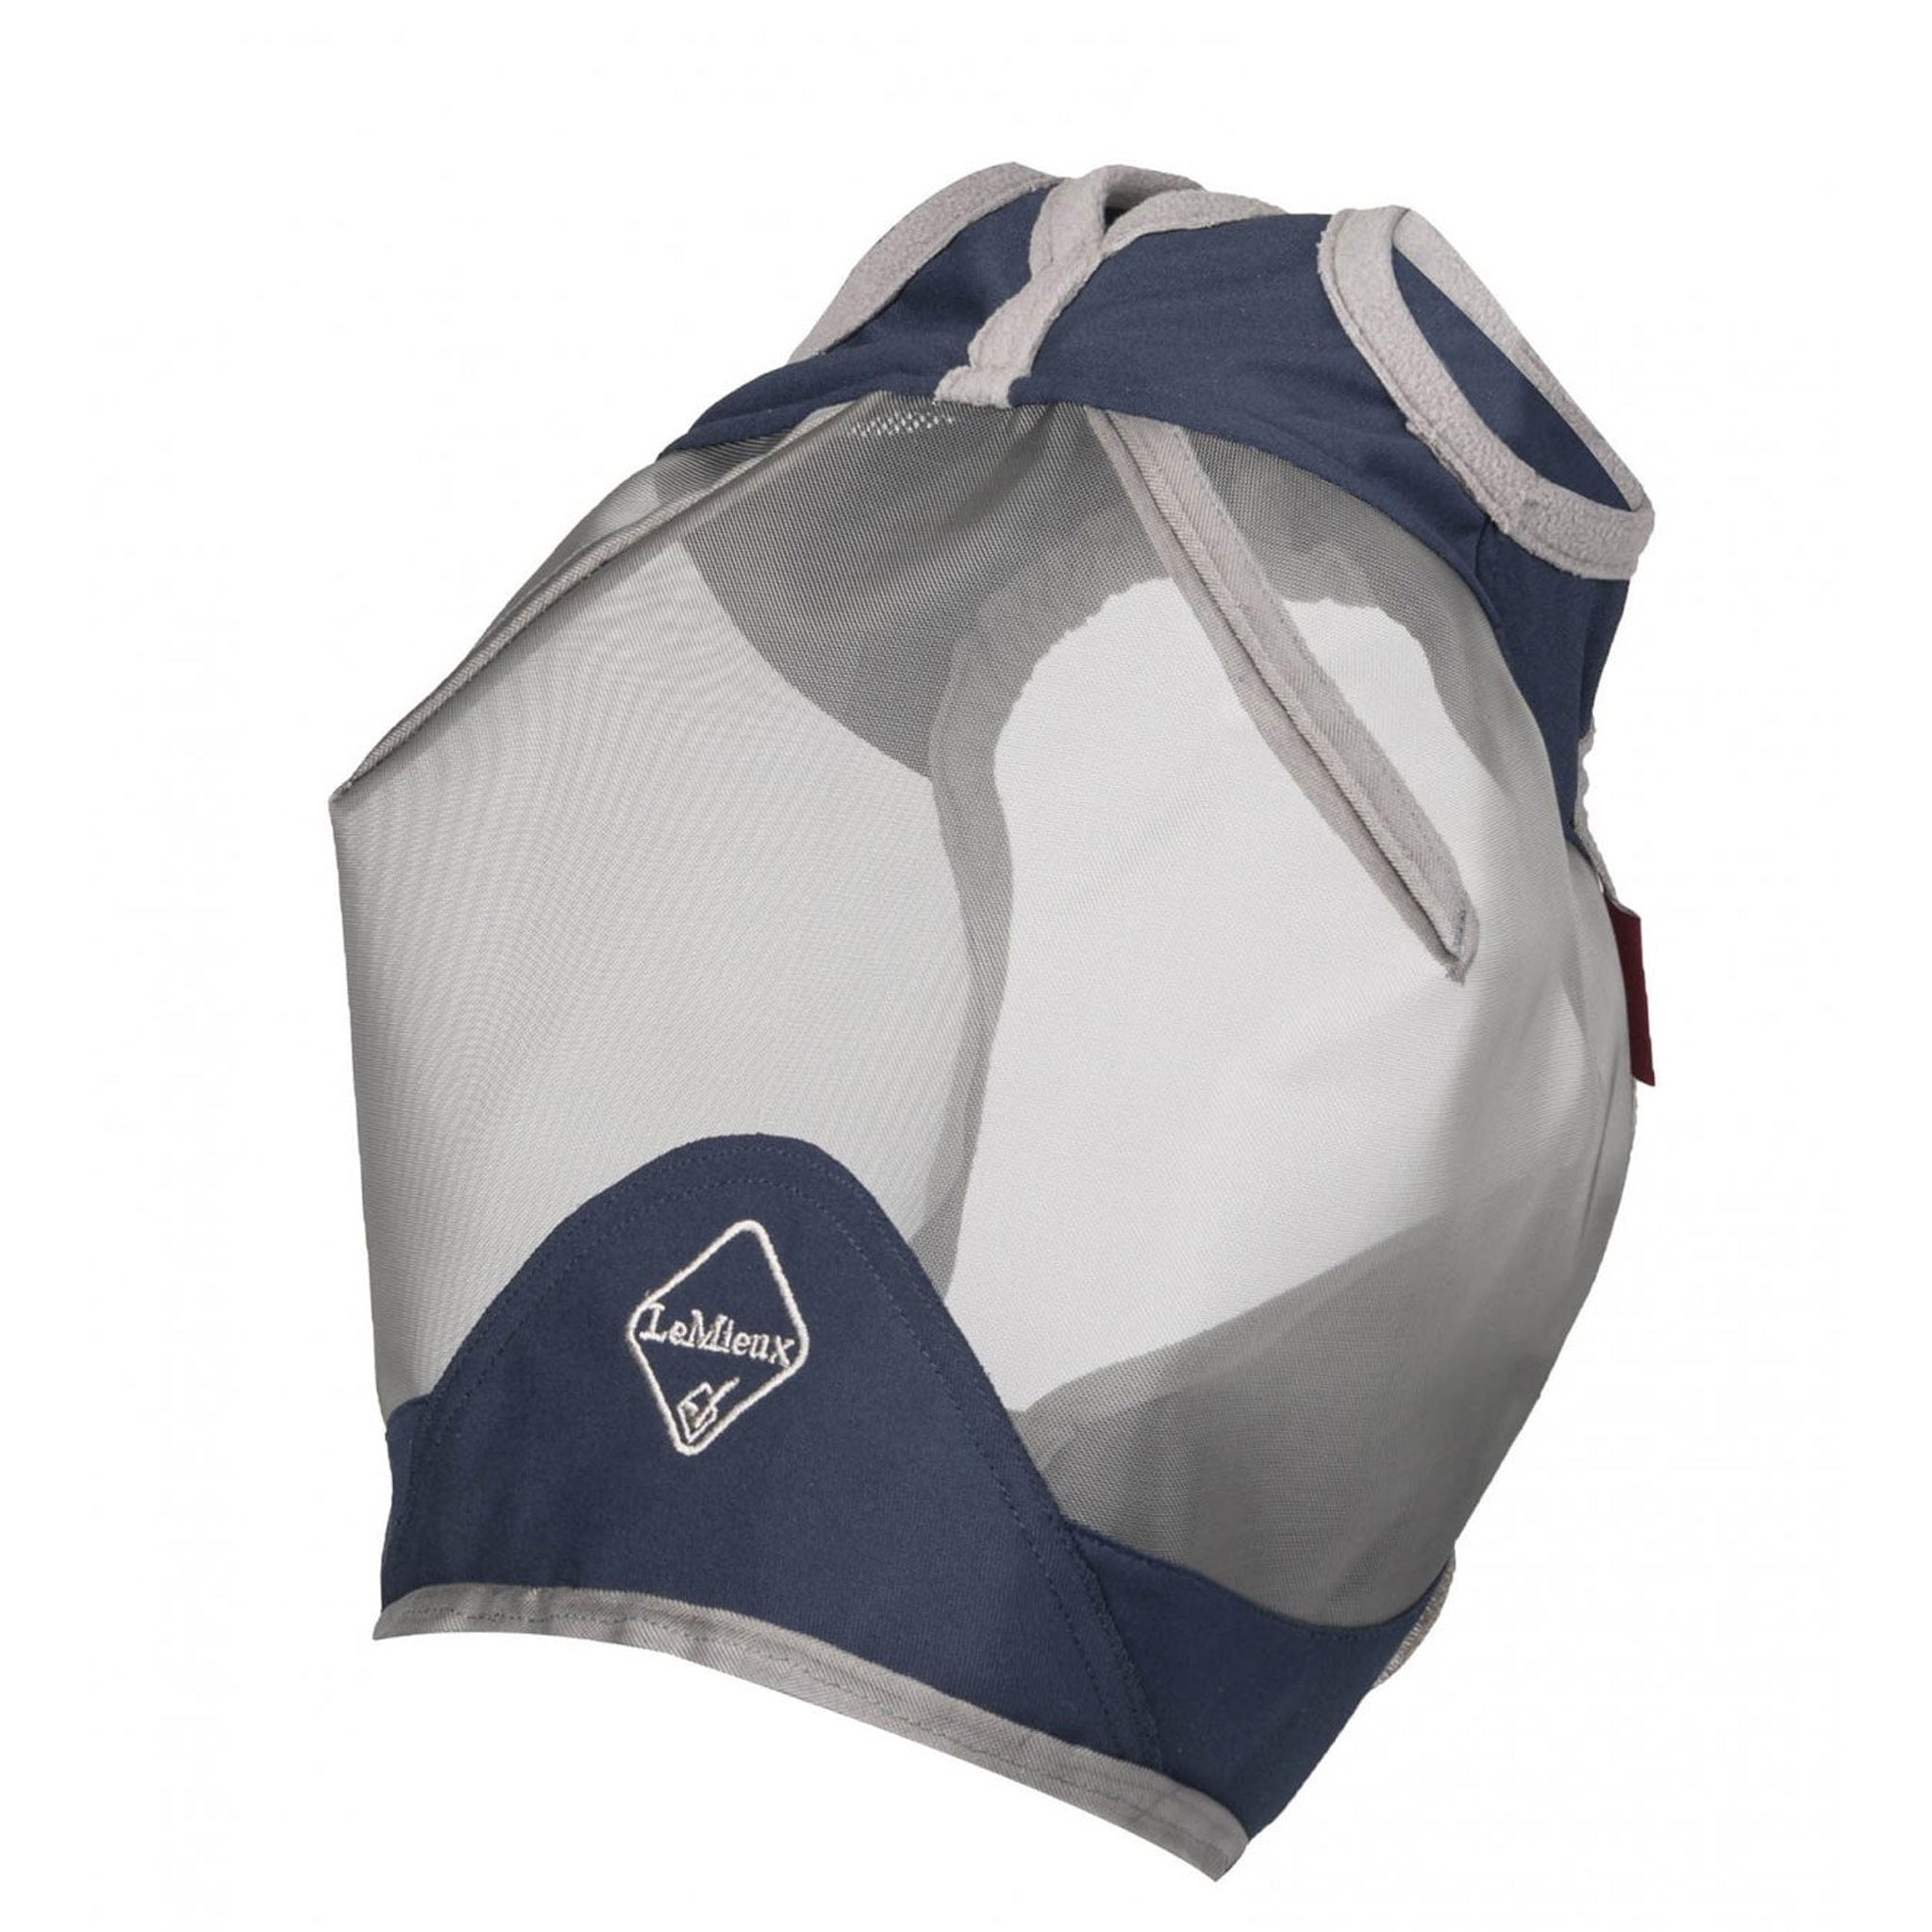 LeMieux Armour Shield Pro Standard Fly Mask Without Ears or Nose 5817 Navy and Silver